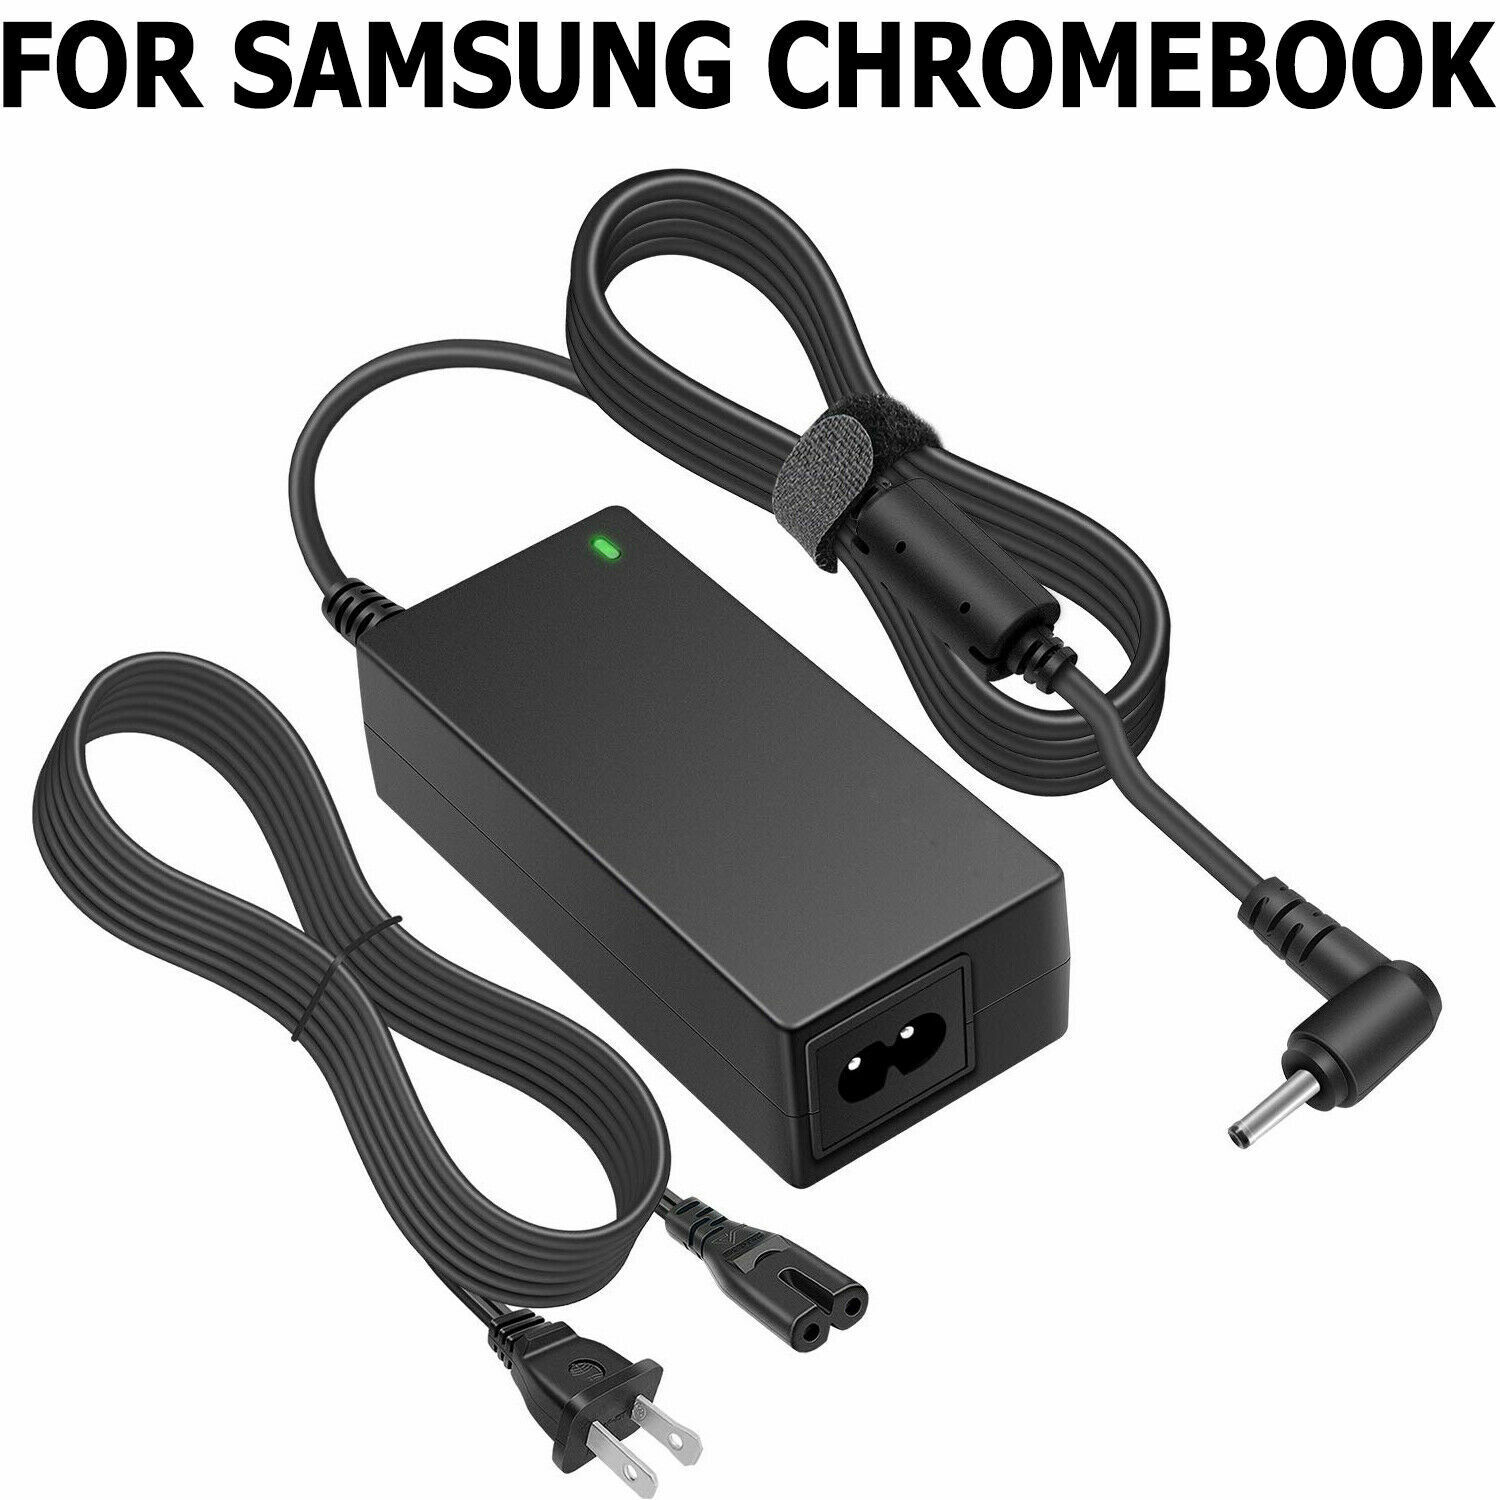 For Samsung ATIV Tab GT-P8510 Chromebook 40W 12V 3.33A Replacement Wall Charger